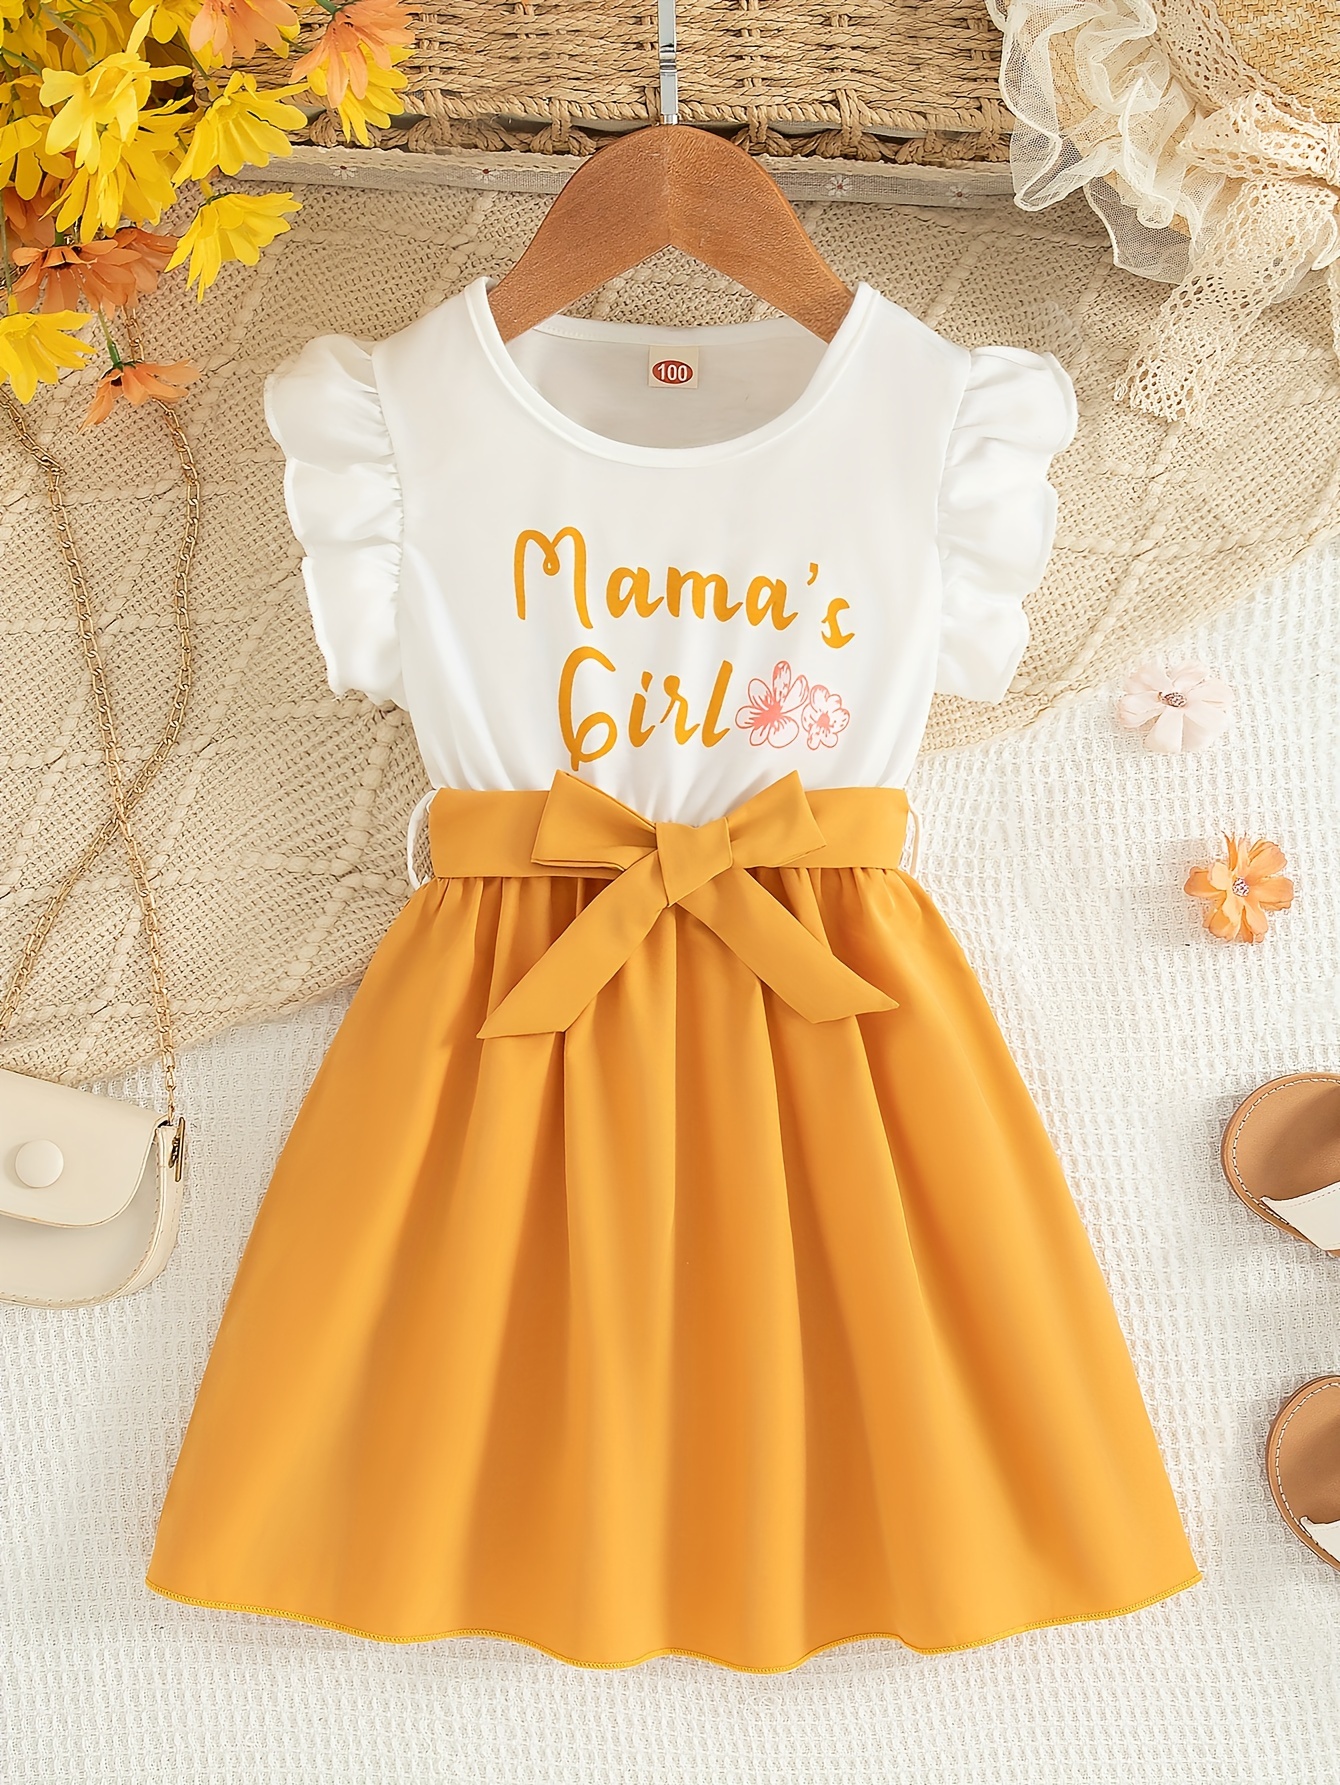  pineappleclothing Madre Hija Matching dresses-mommy de fiesta y  me Outfits : Ropa, Zapatos y Joyería